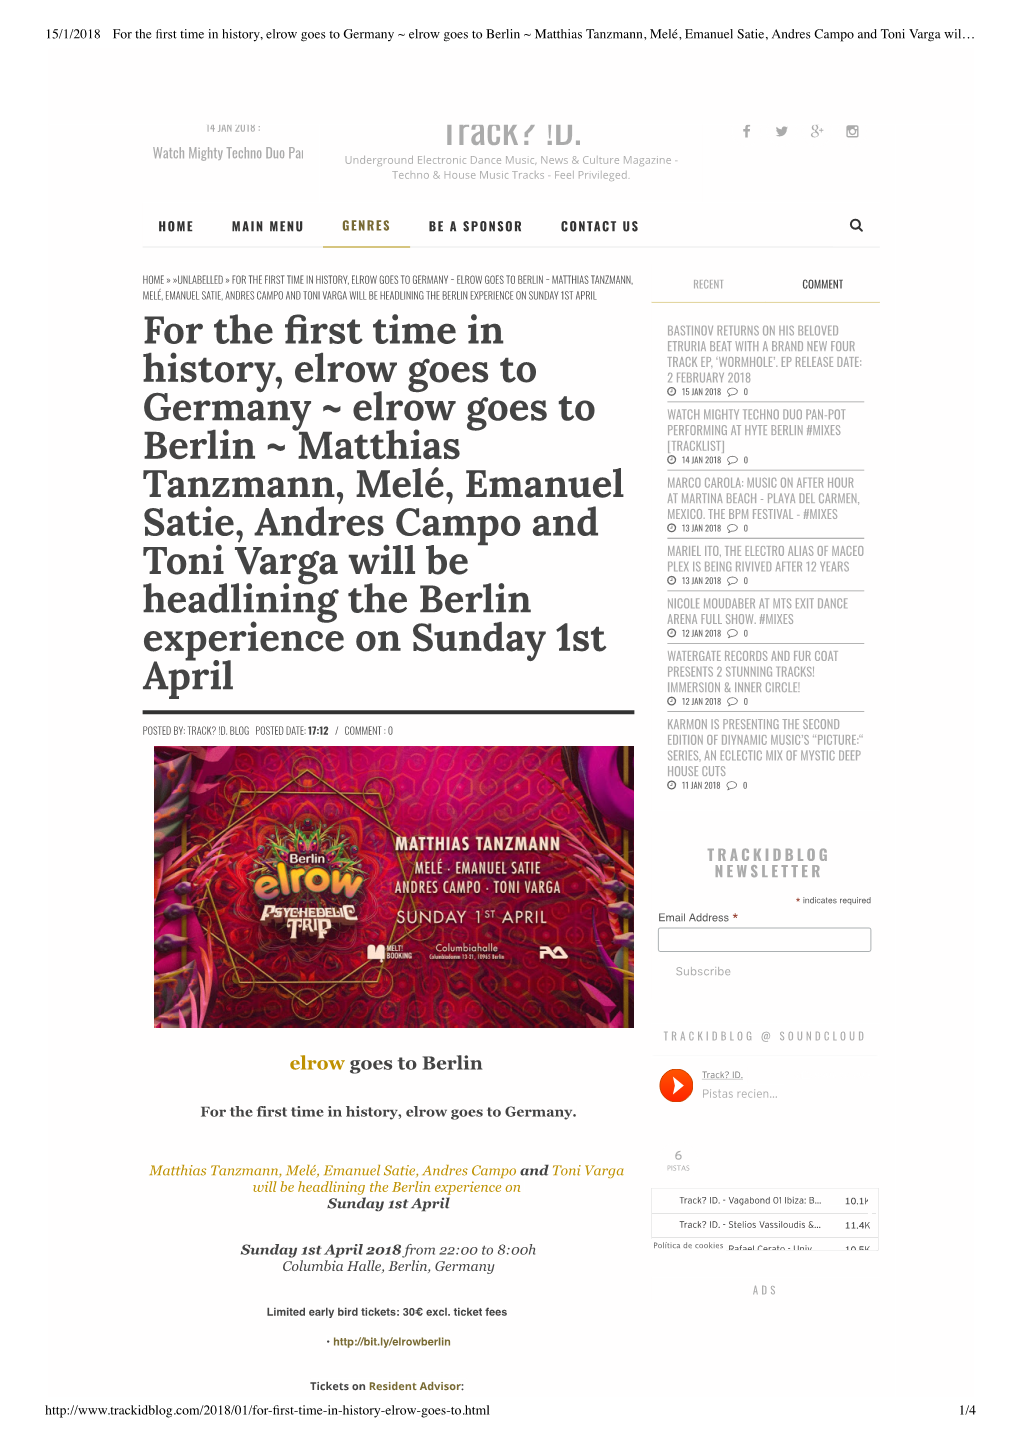 Track? !D. for the Rst Time in History, Elrow Goes to Germany ~ Elrow